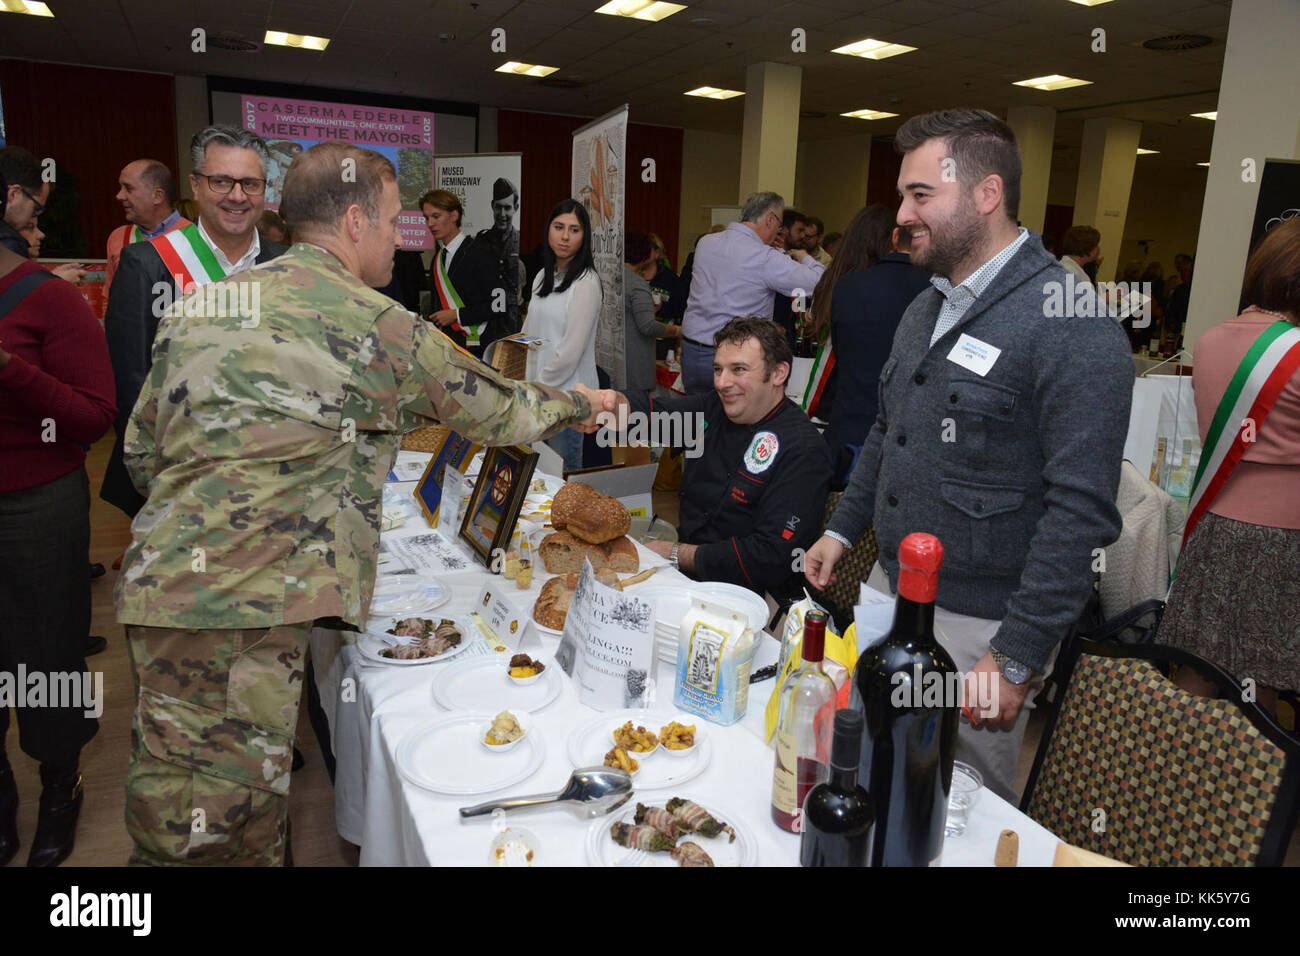 U.S. Col. Eric M. Berdy, U.S. Army Garrison Italy commander, thanks to Emanuele Traverso, cook from Camisano community, during the Meet the Mayors event at the Golden Lion Conference Center on Caserma Ederle, Vicenza, Italy, Nov. 8, 2017.   The event is an informal fair that hosts mayors, council members, and cultural and tourism representatives from Italian townships in the Vicenza and Padova provinces. (U.S. Army Photo by Paolo Bovo) Stock Photo